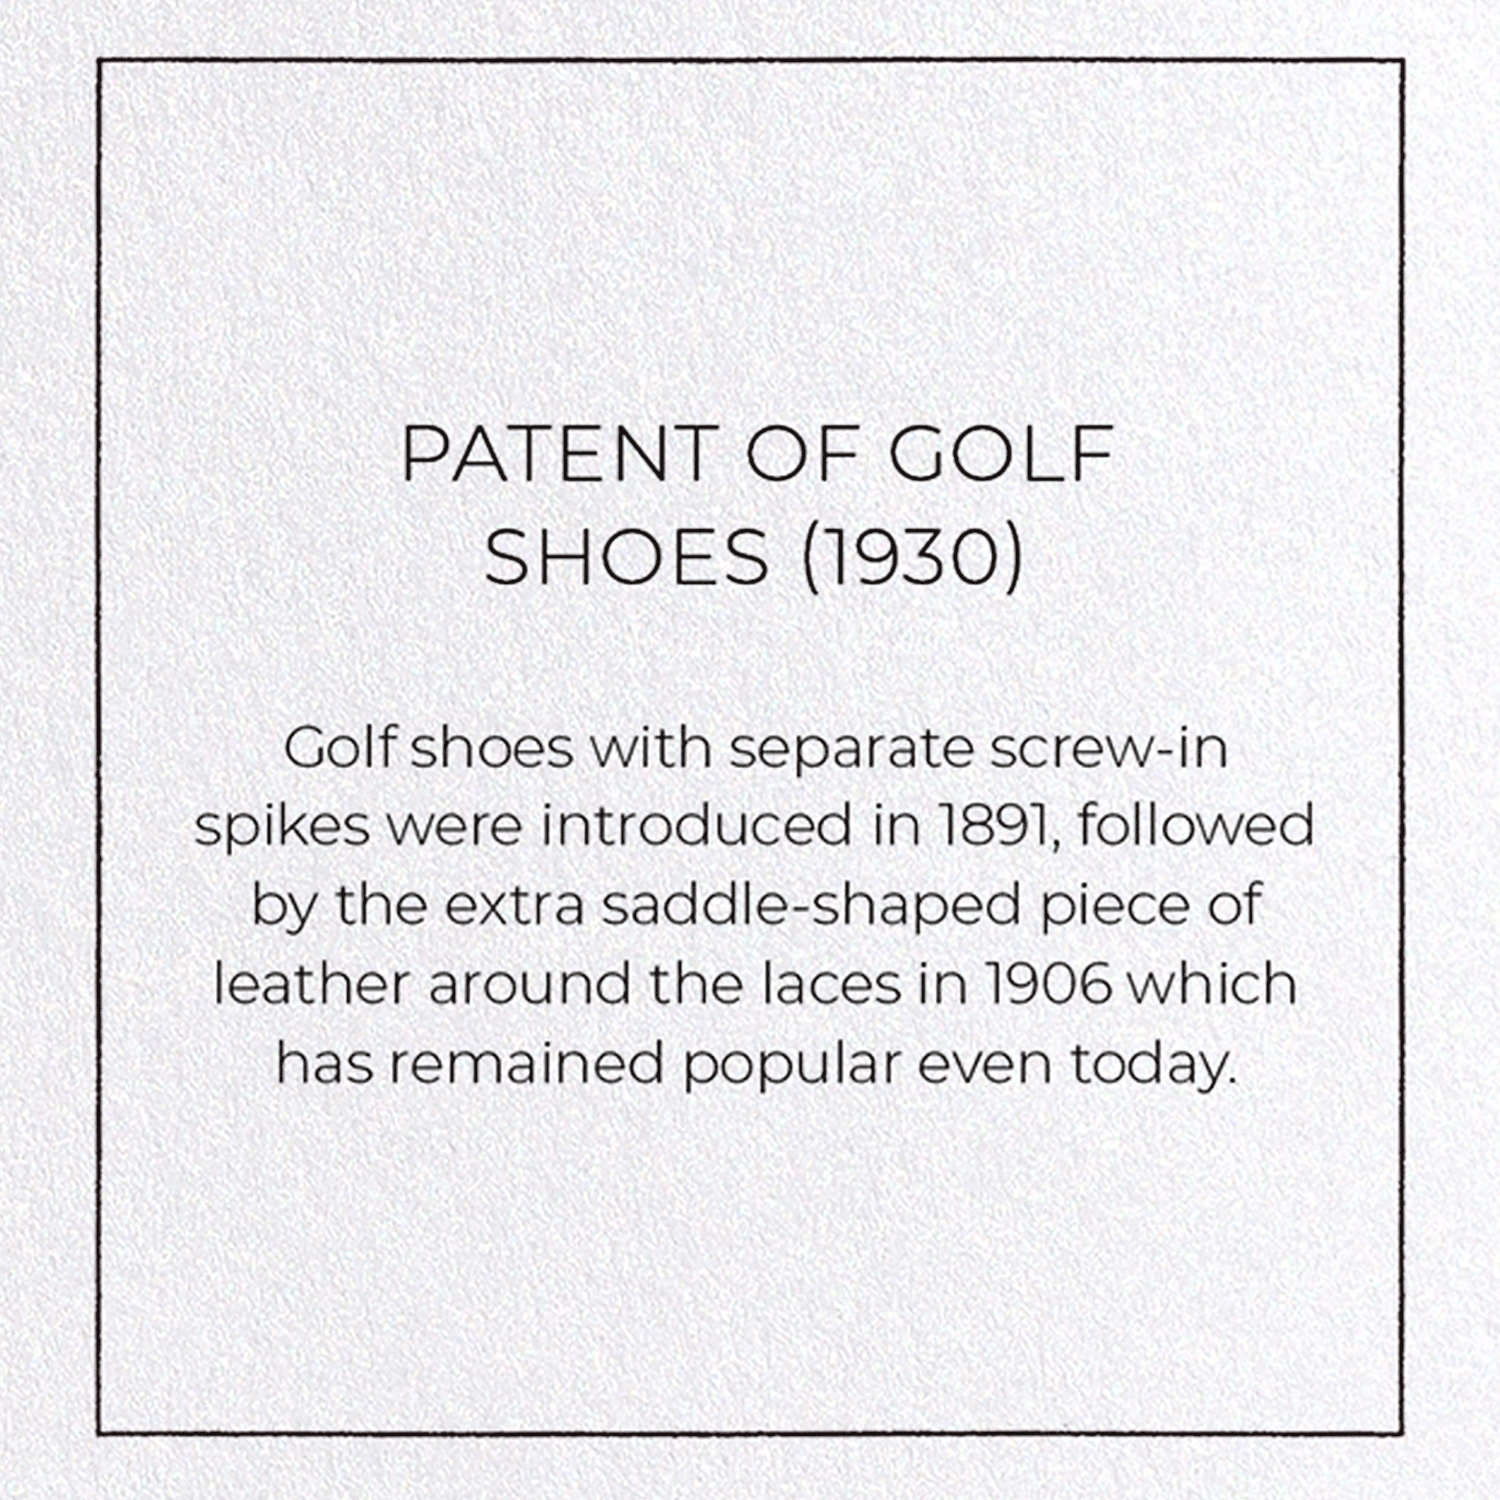 PATENT OF GOLF SHOES (1930)